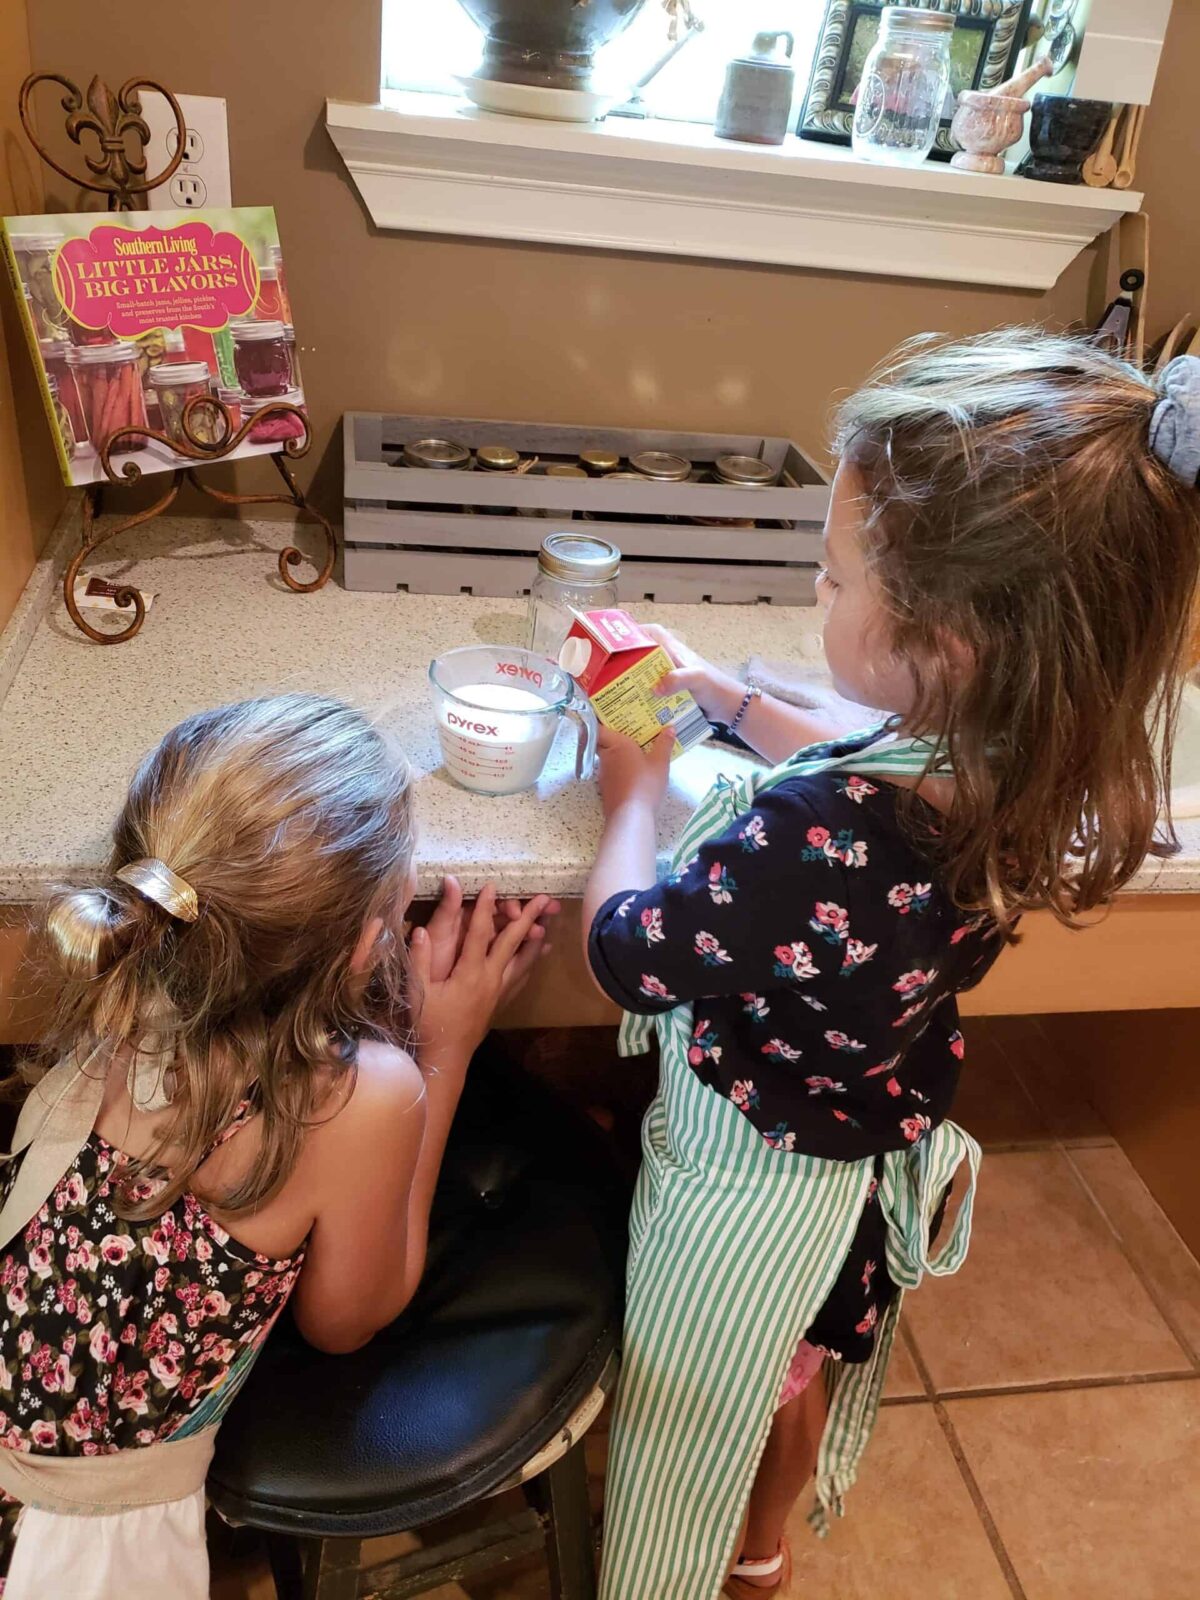 Little girls measuring whipping cream in a liquid measuring cup